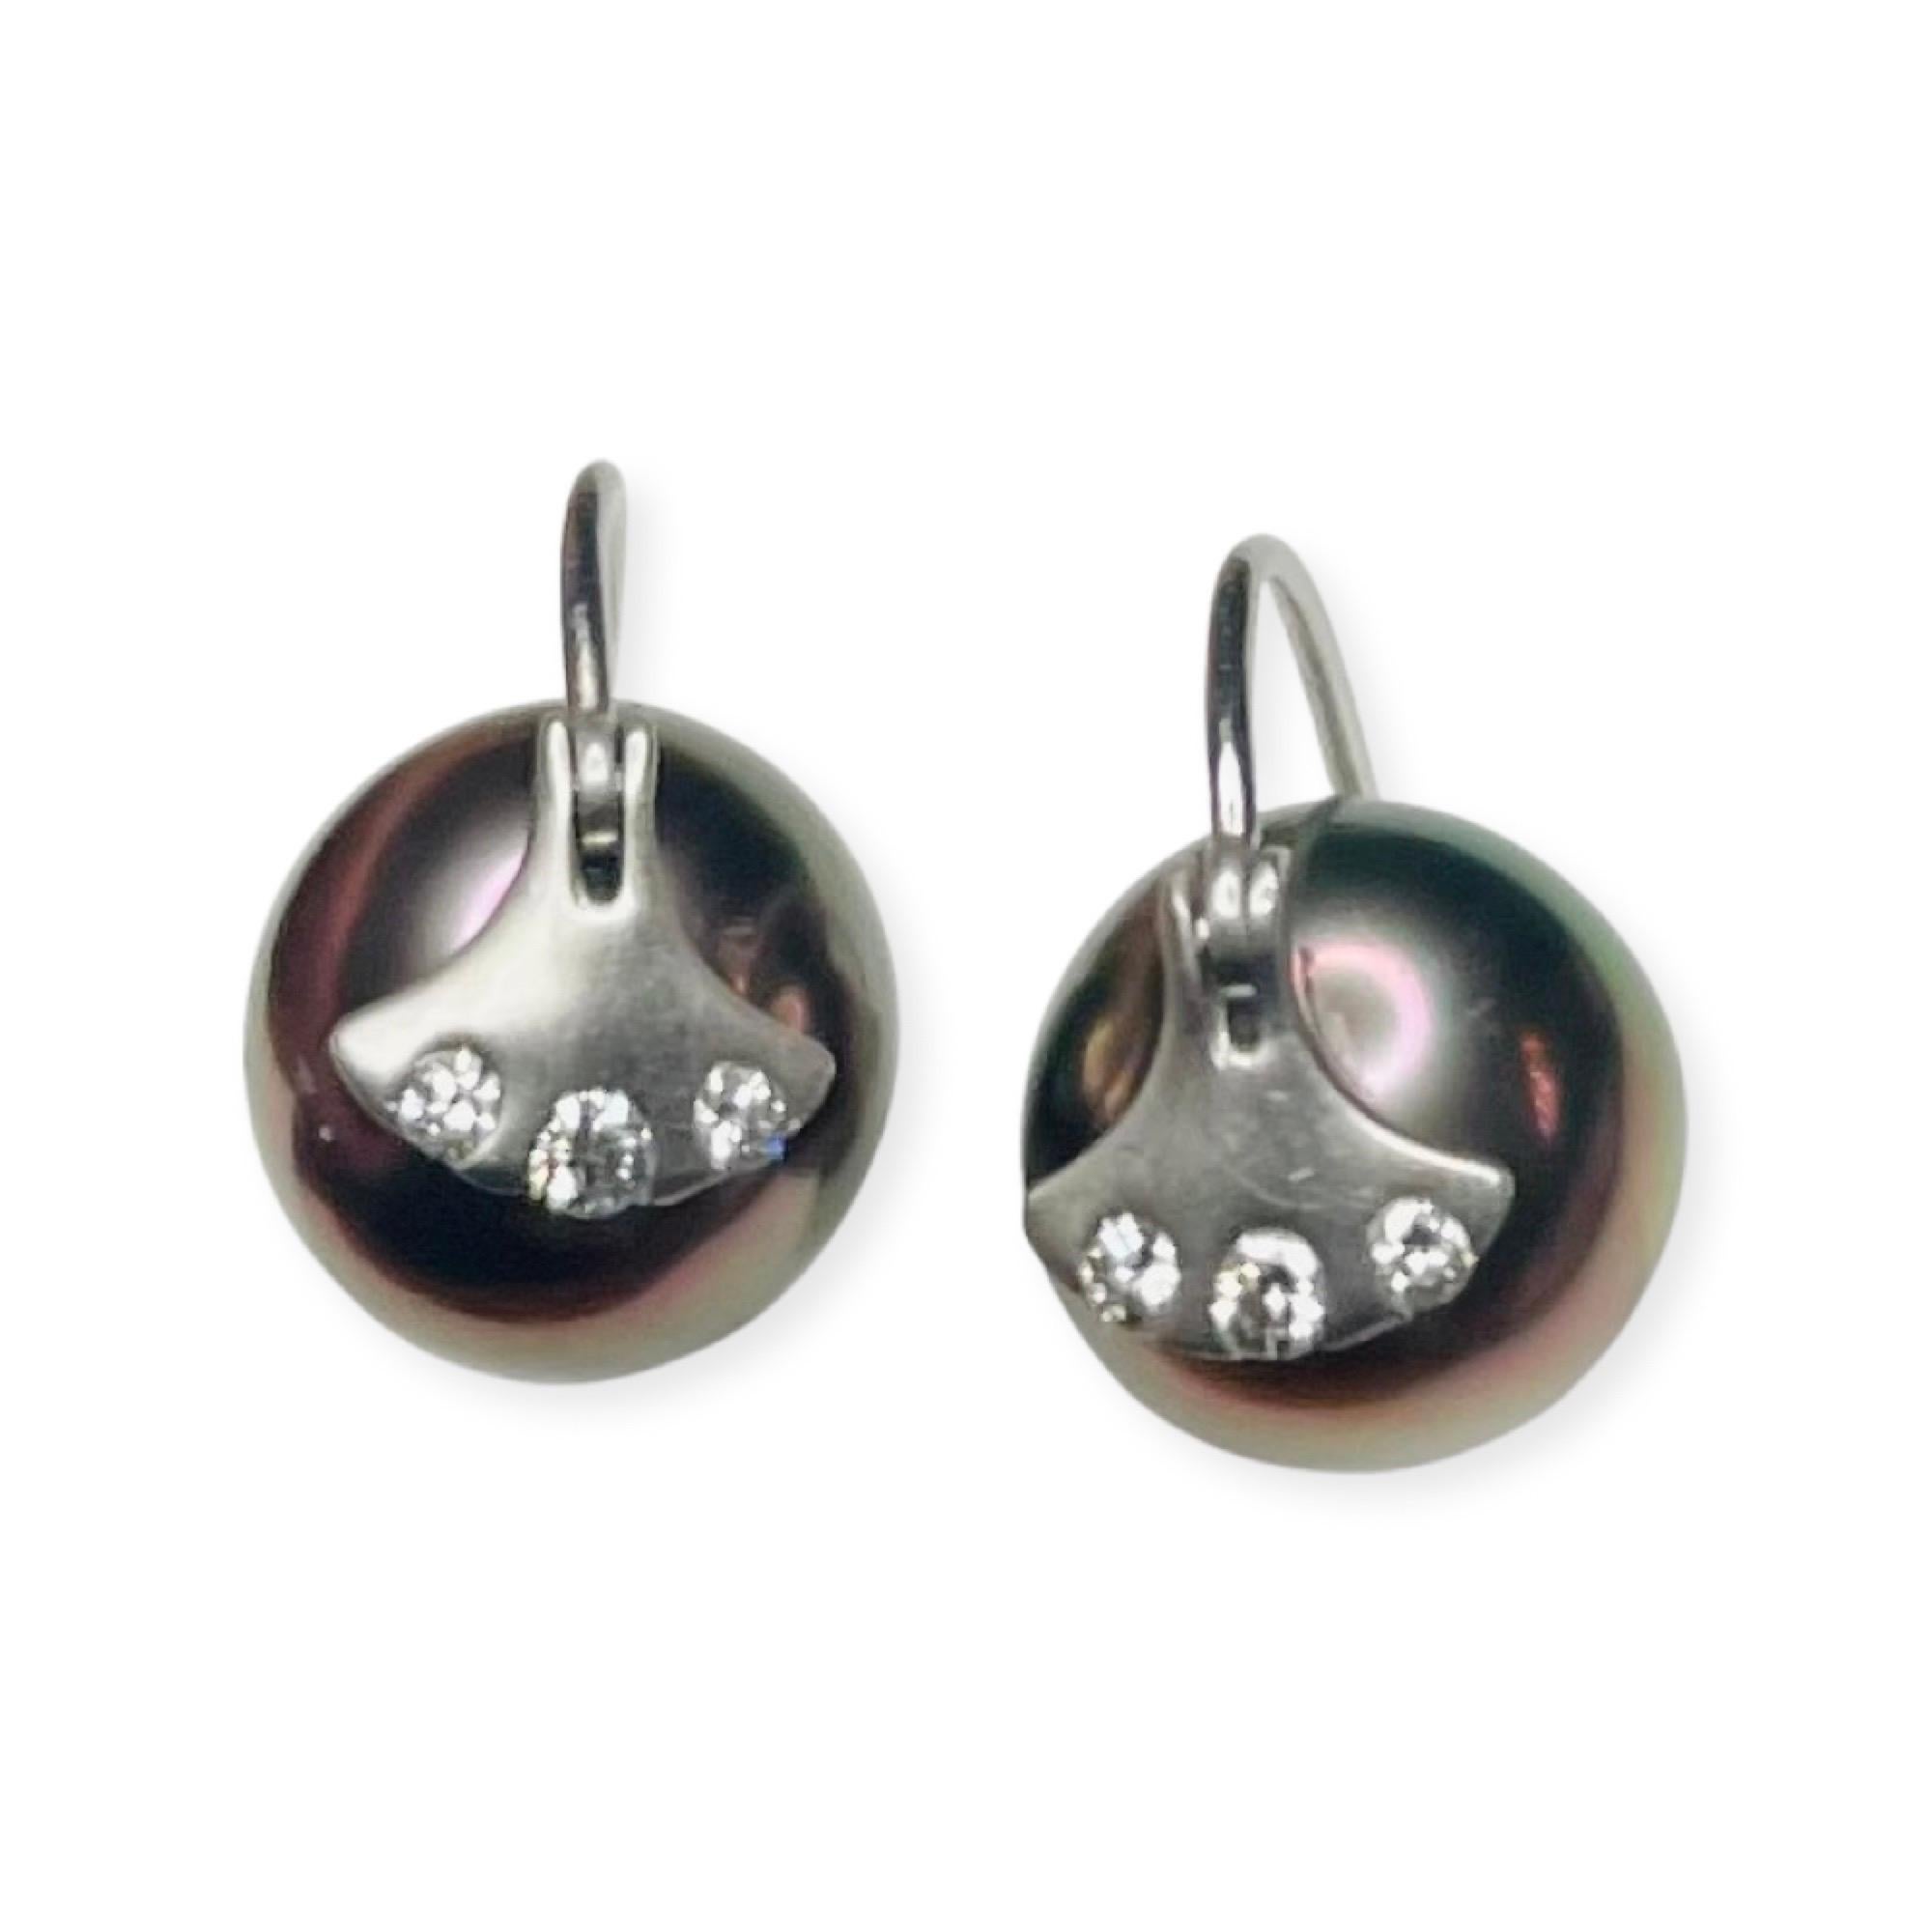 Brian Sholdt Platinum, Natural Color, Cultured. Black Tahitian Pearl Earrings. The Pearls measure 10.5 mm. They are round with slight blemishes and a rose overtone. They have a high luster.  There is a fan shaped, platinum piece at the top of the